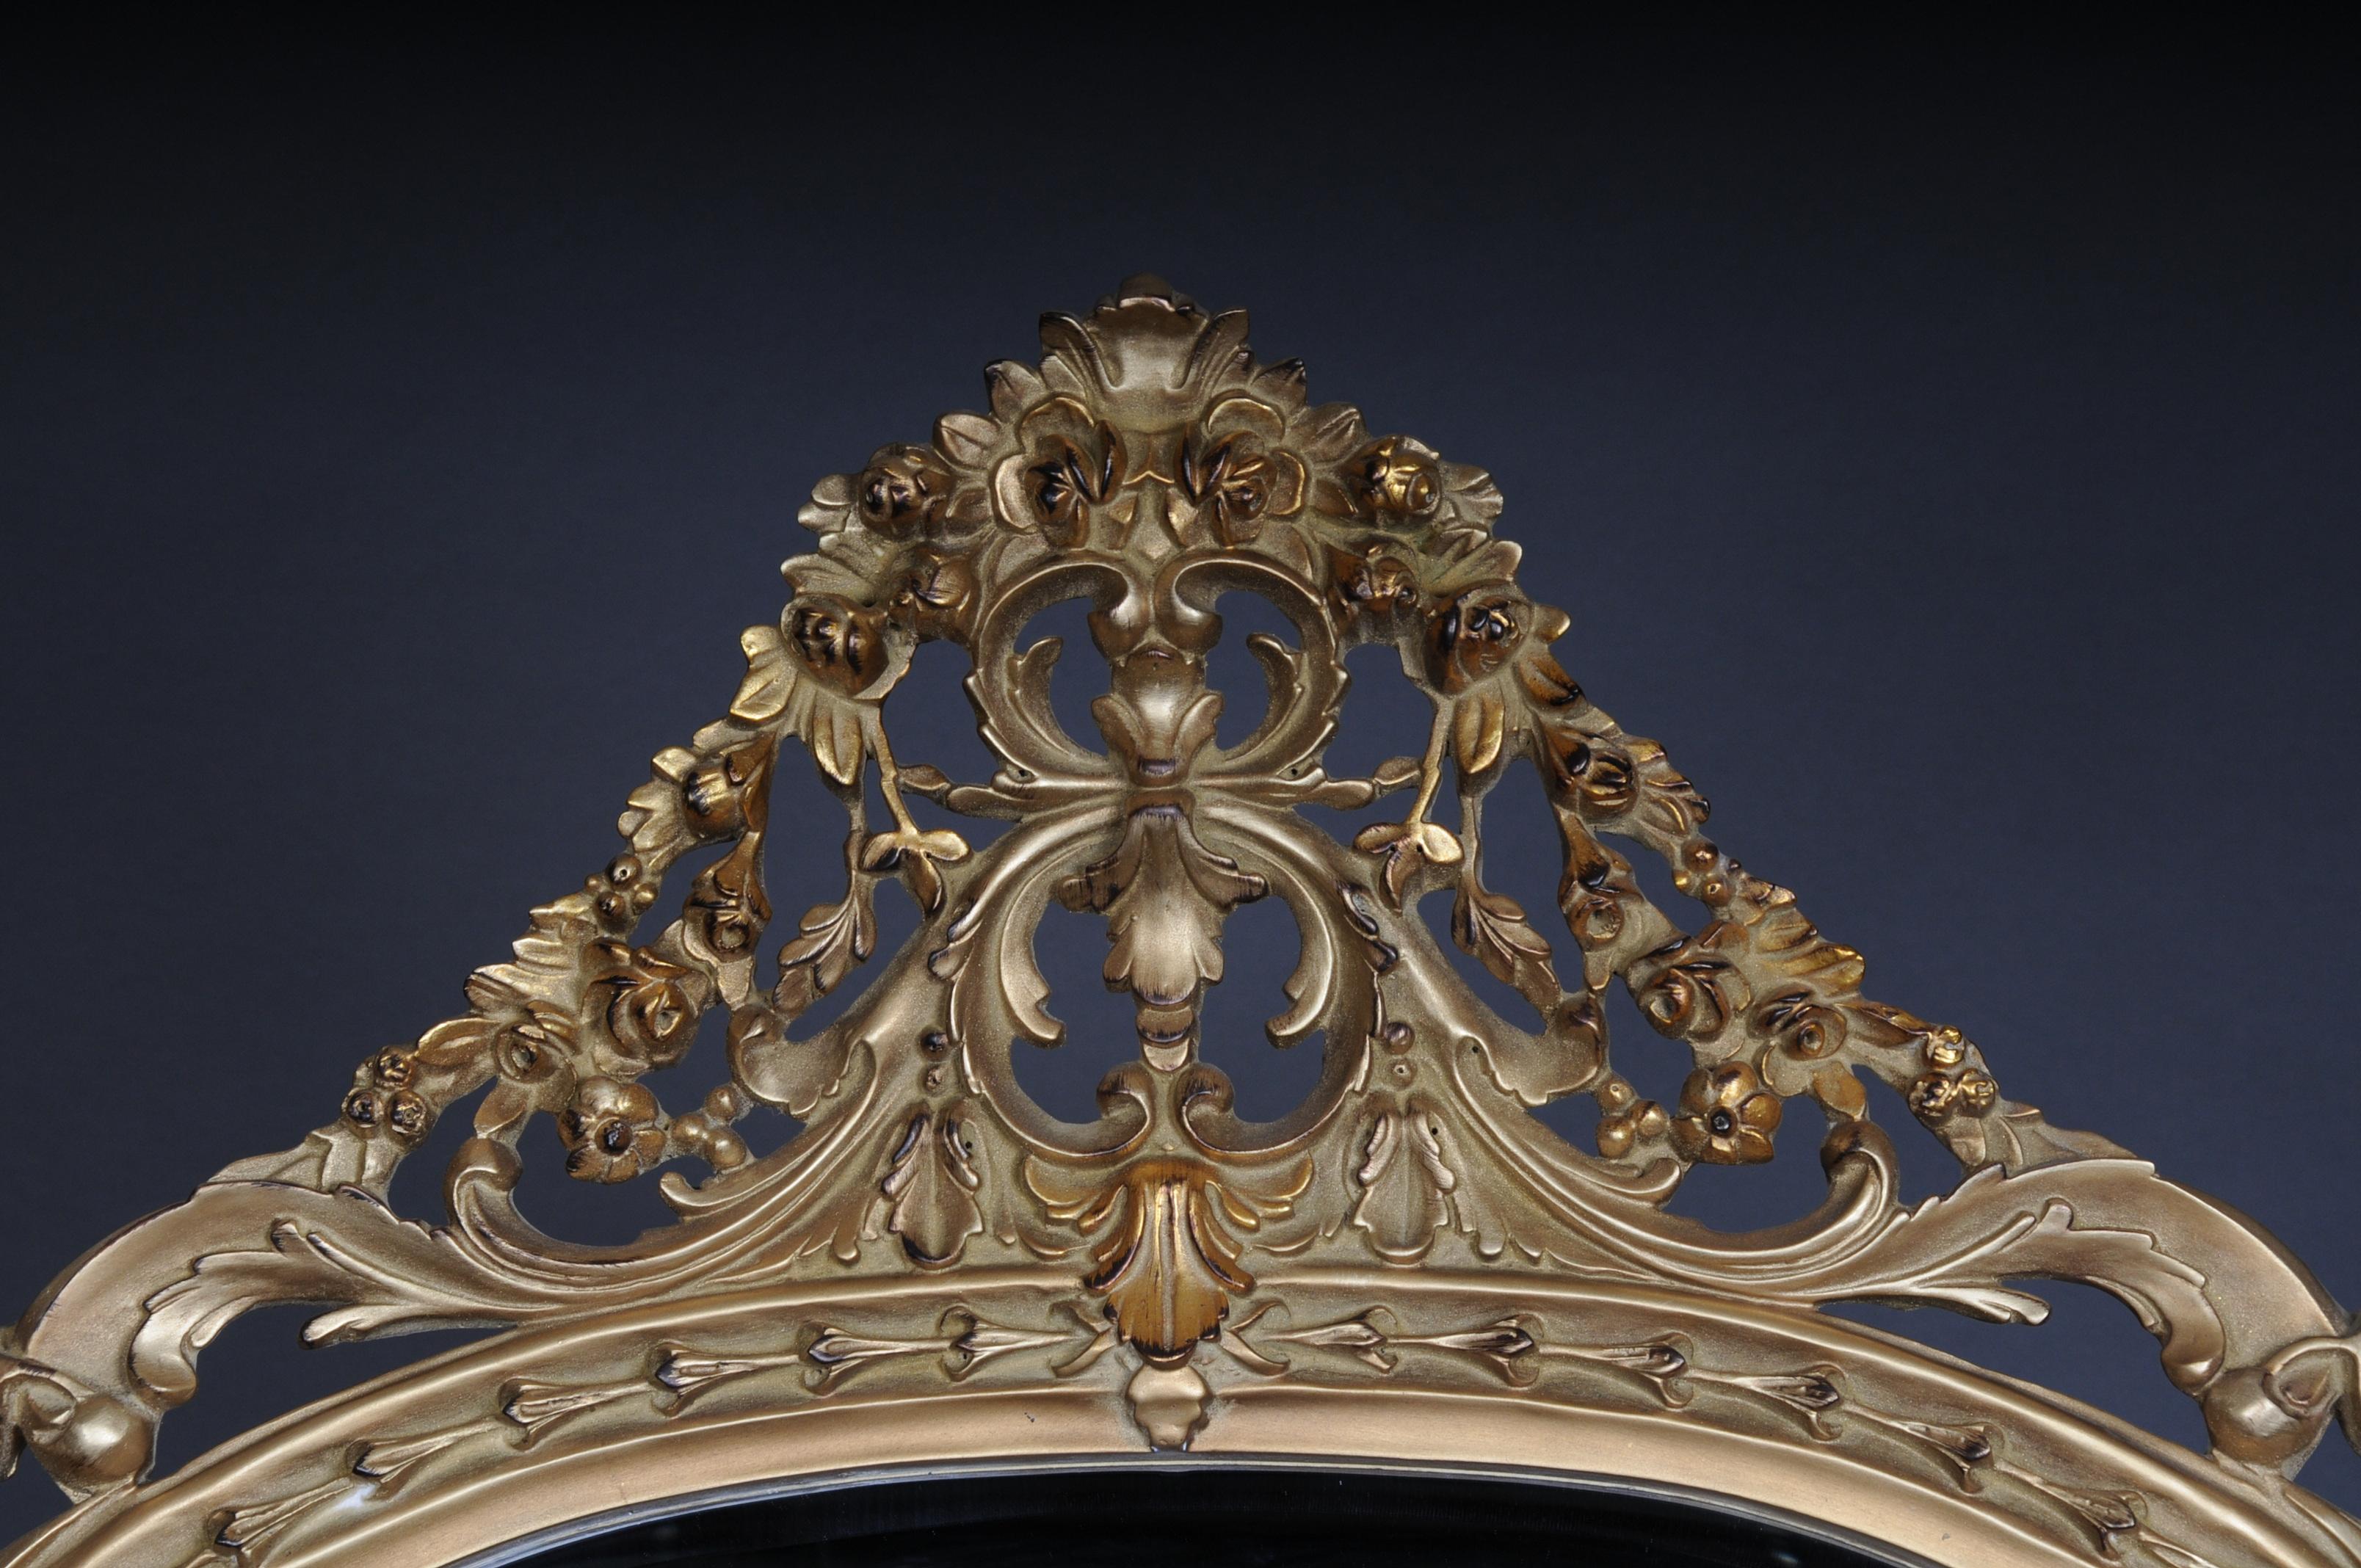 Hand-Carved Richly Carved Royal Wall Mirror in Louis XV, Beech Wood For Sale